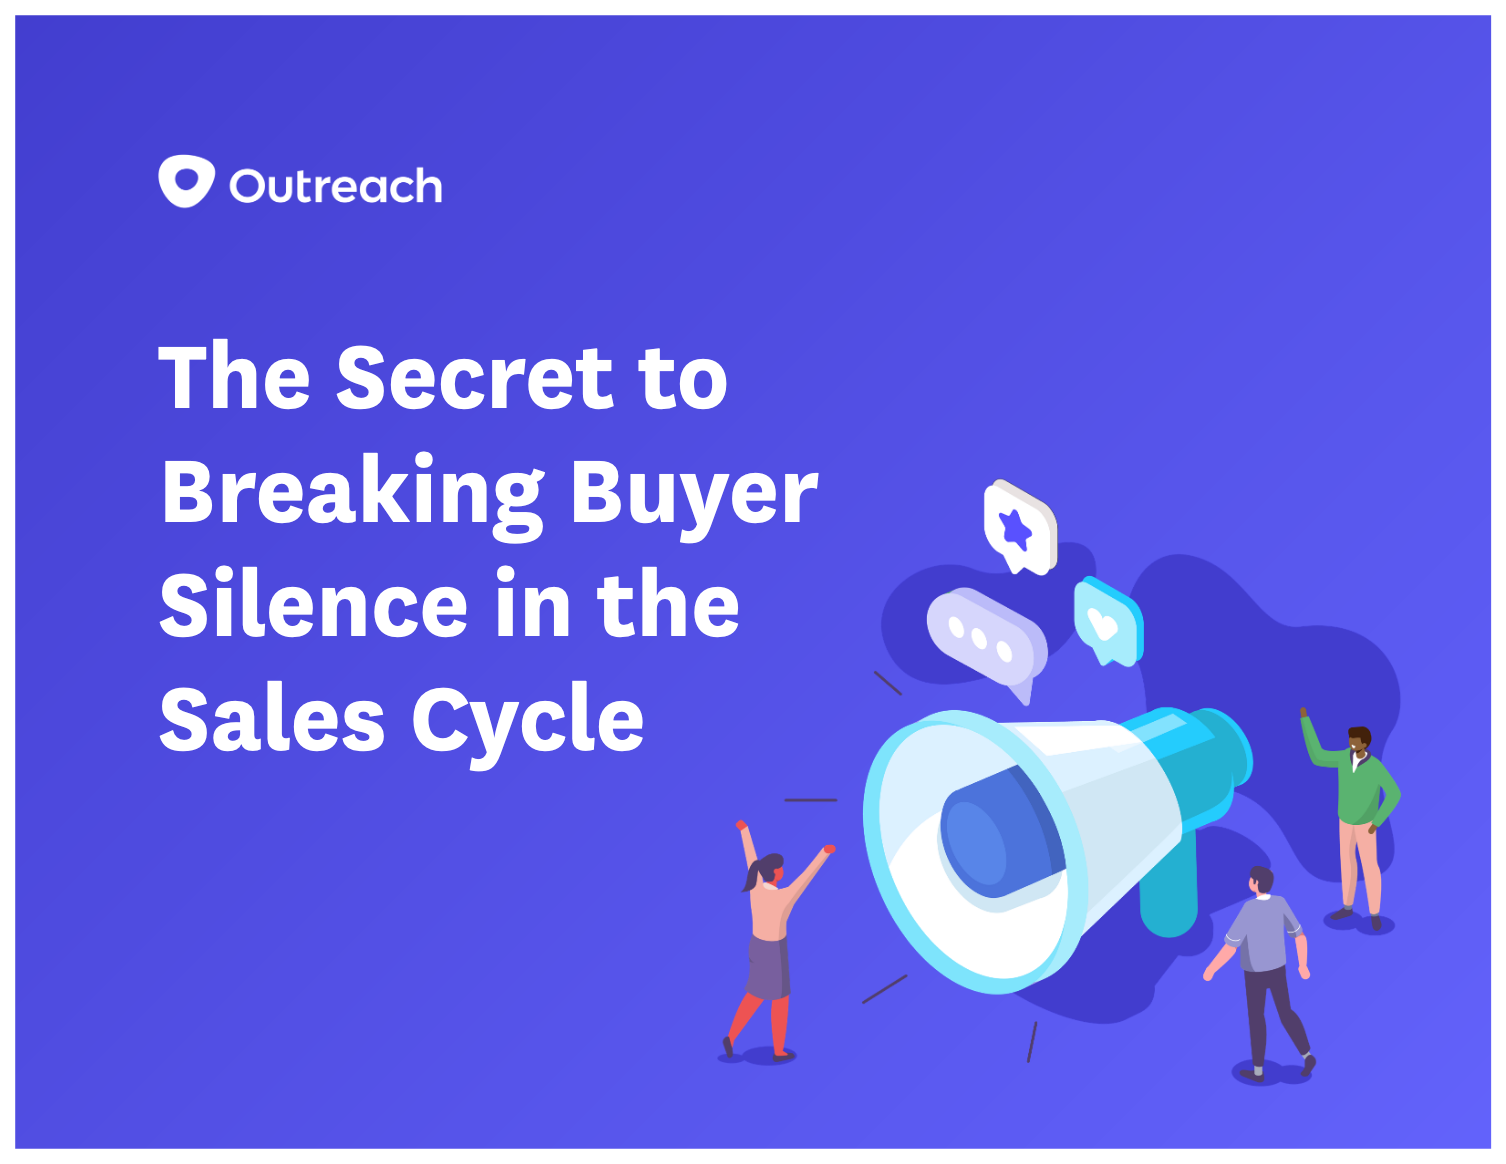 Screenshot 2020 11 06 The Secret to Breaking Prospect Silence in the Sales Cycle Final 1 3 pdf - The Secret to Breaking Buyer Silence in the Sales Cycle